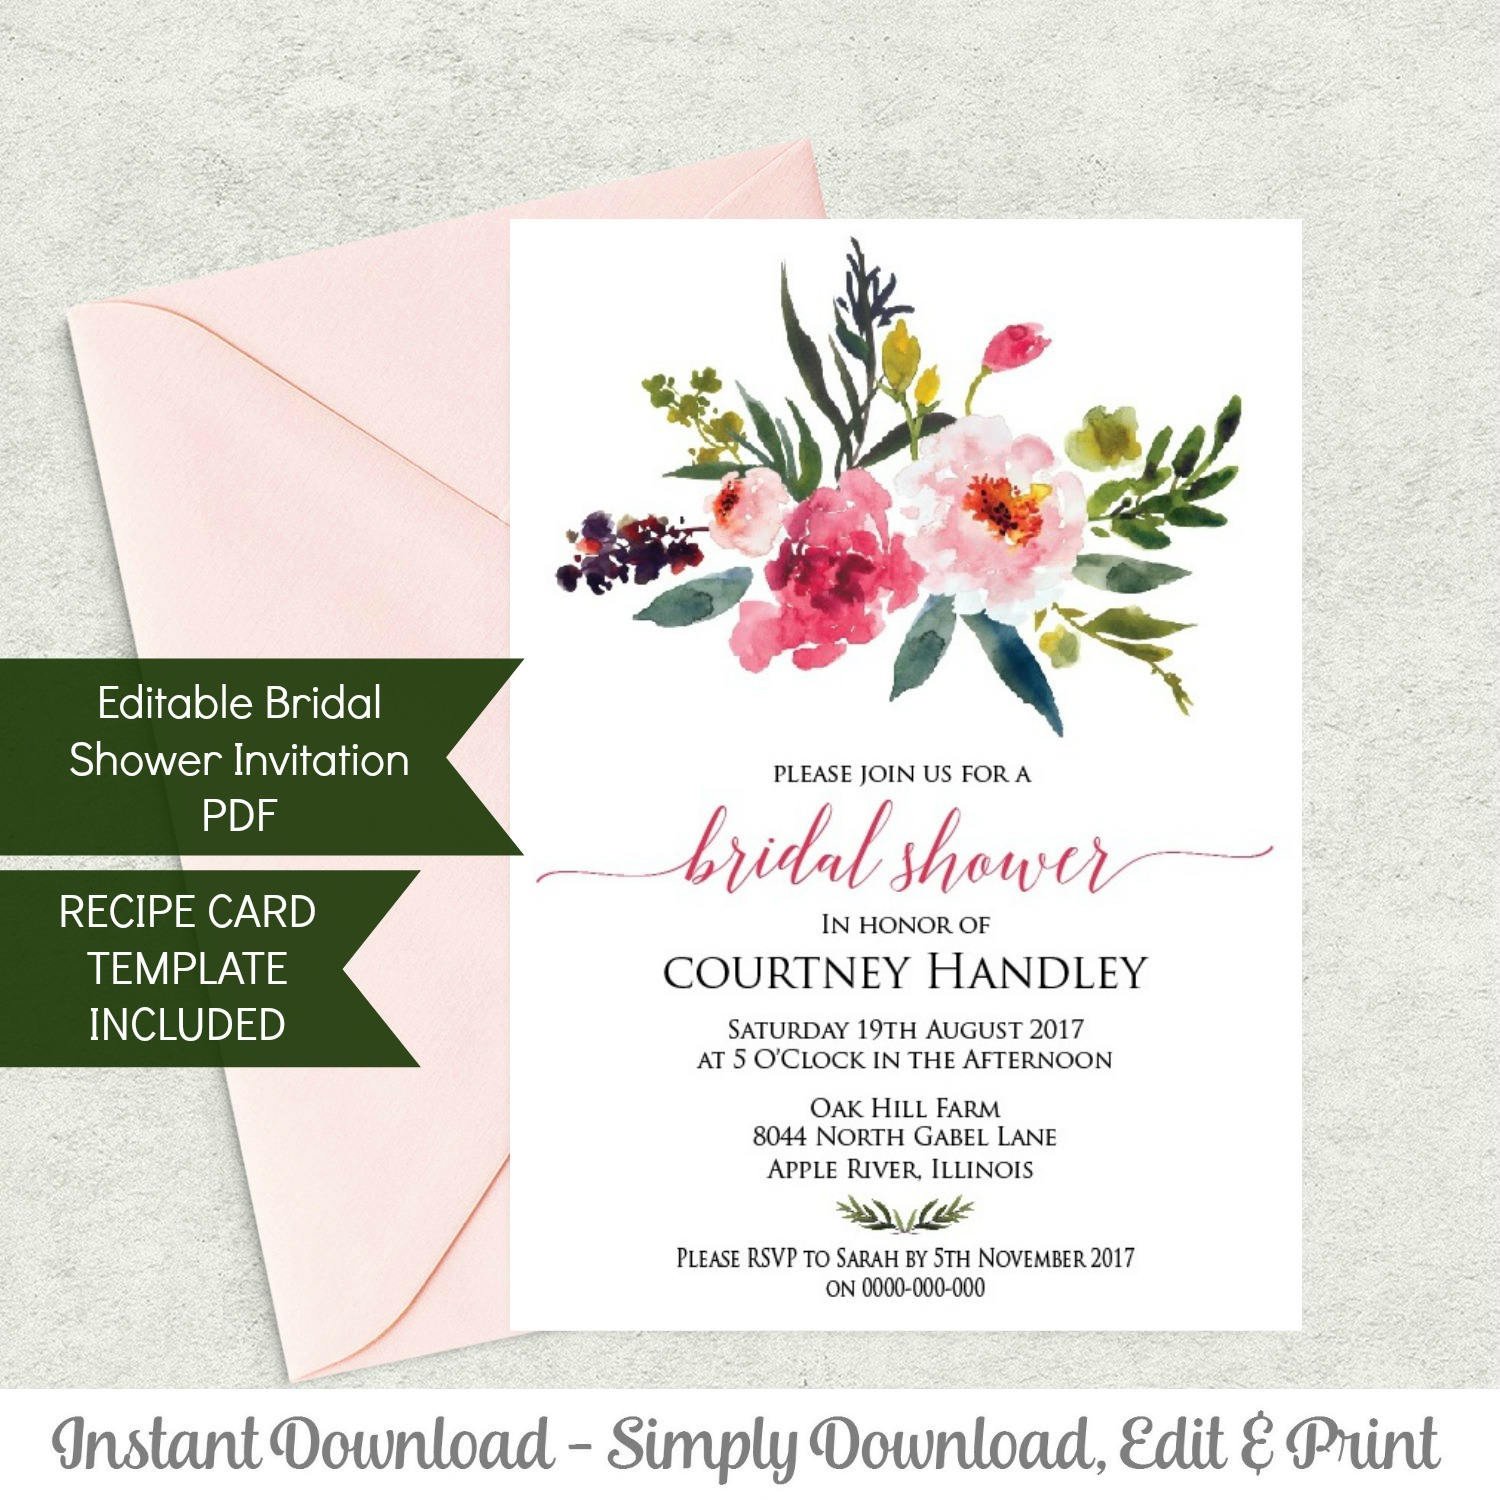 Printable Bridal Shower Invitation Template and Recipe Card